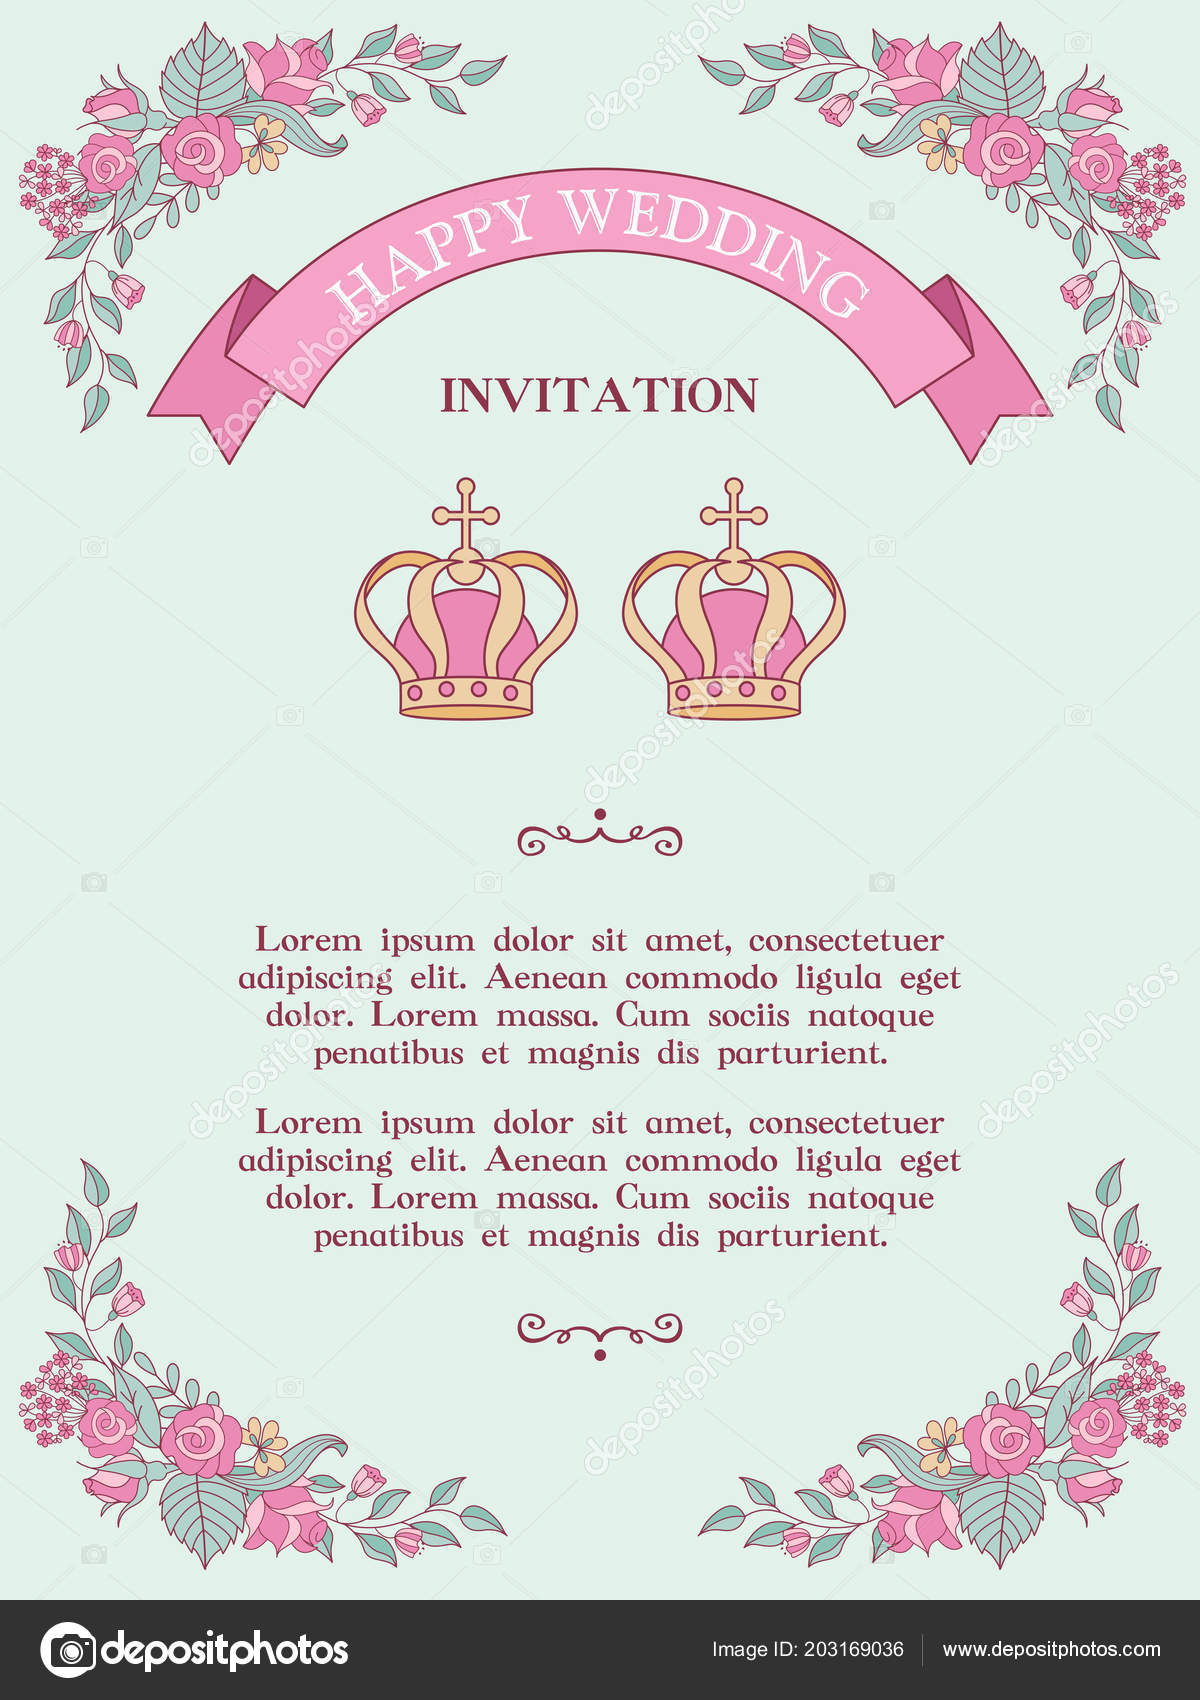 Wedding Invitation Wedding Card Christian Wedding Ceremony Two Wedding Crowns Vector Image By C Katedemianov Vector Stock 203169036